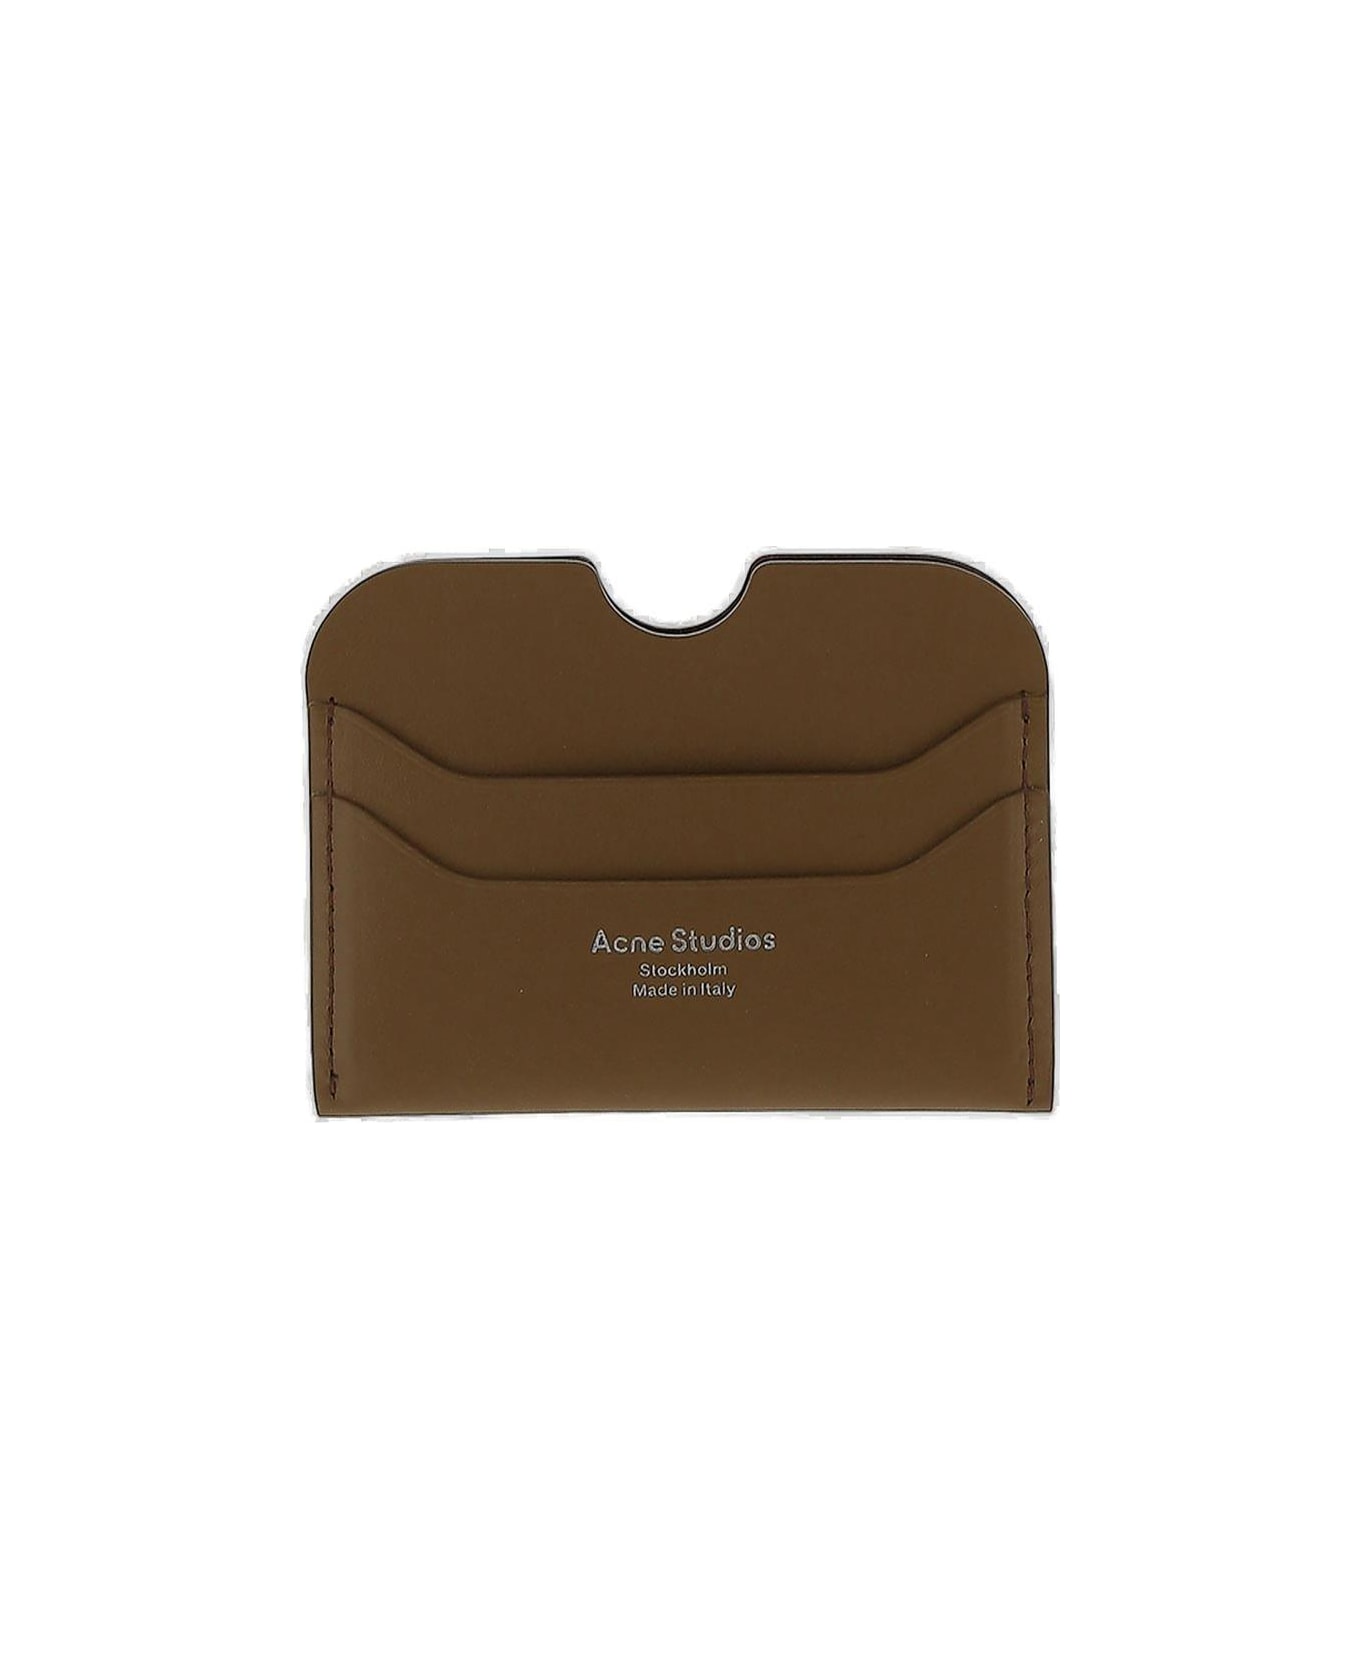 Acne Studios Logo Printed Cut-out Detailed Cardholder 財布